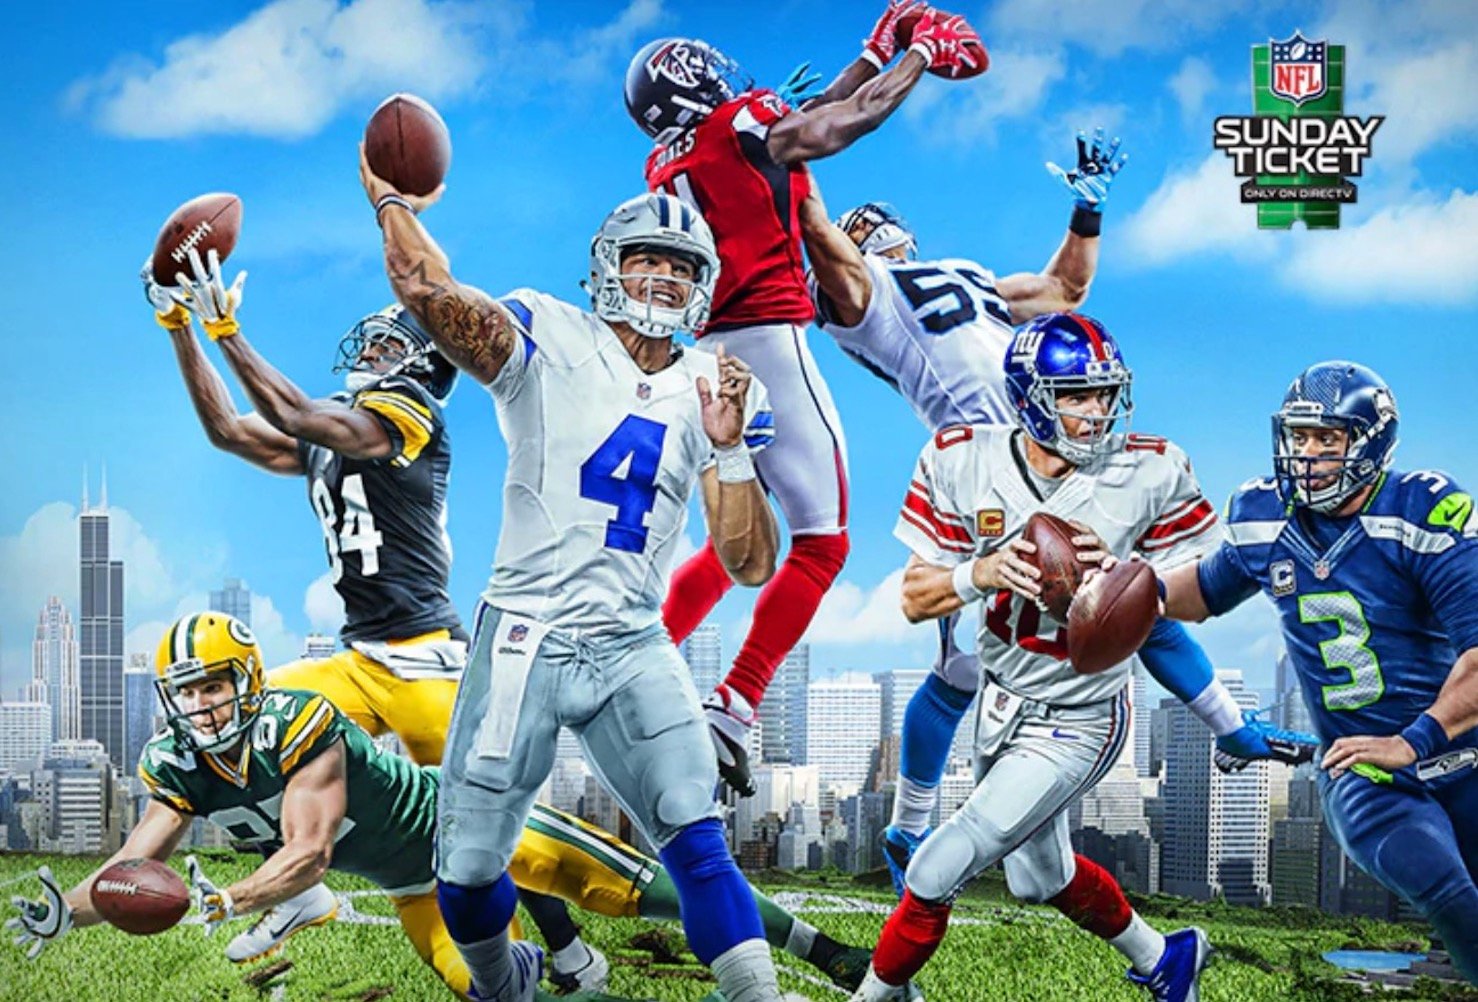 How to Get the NFL Sunday Ticket Without DirecTV